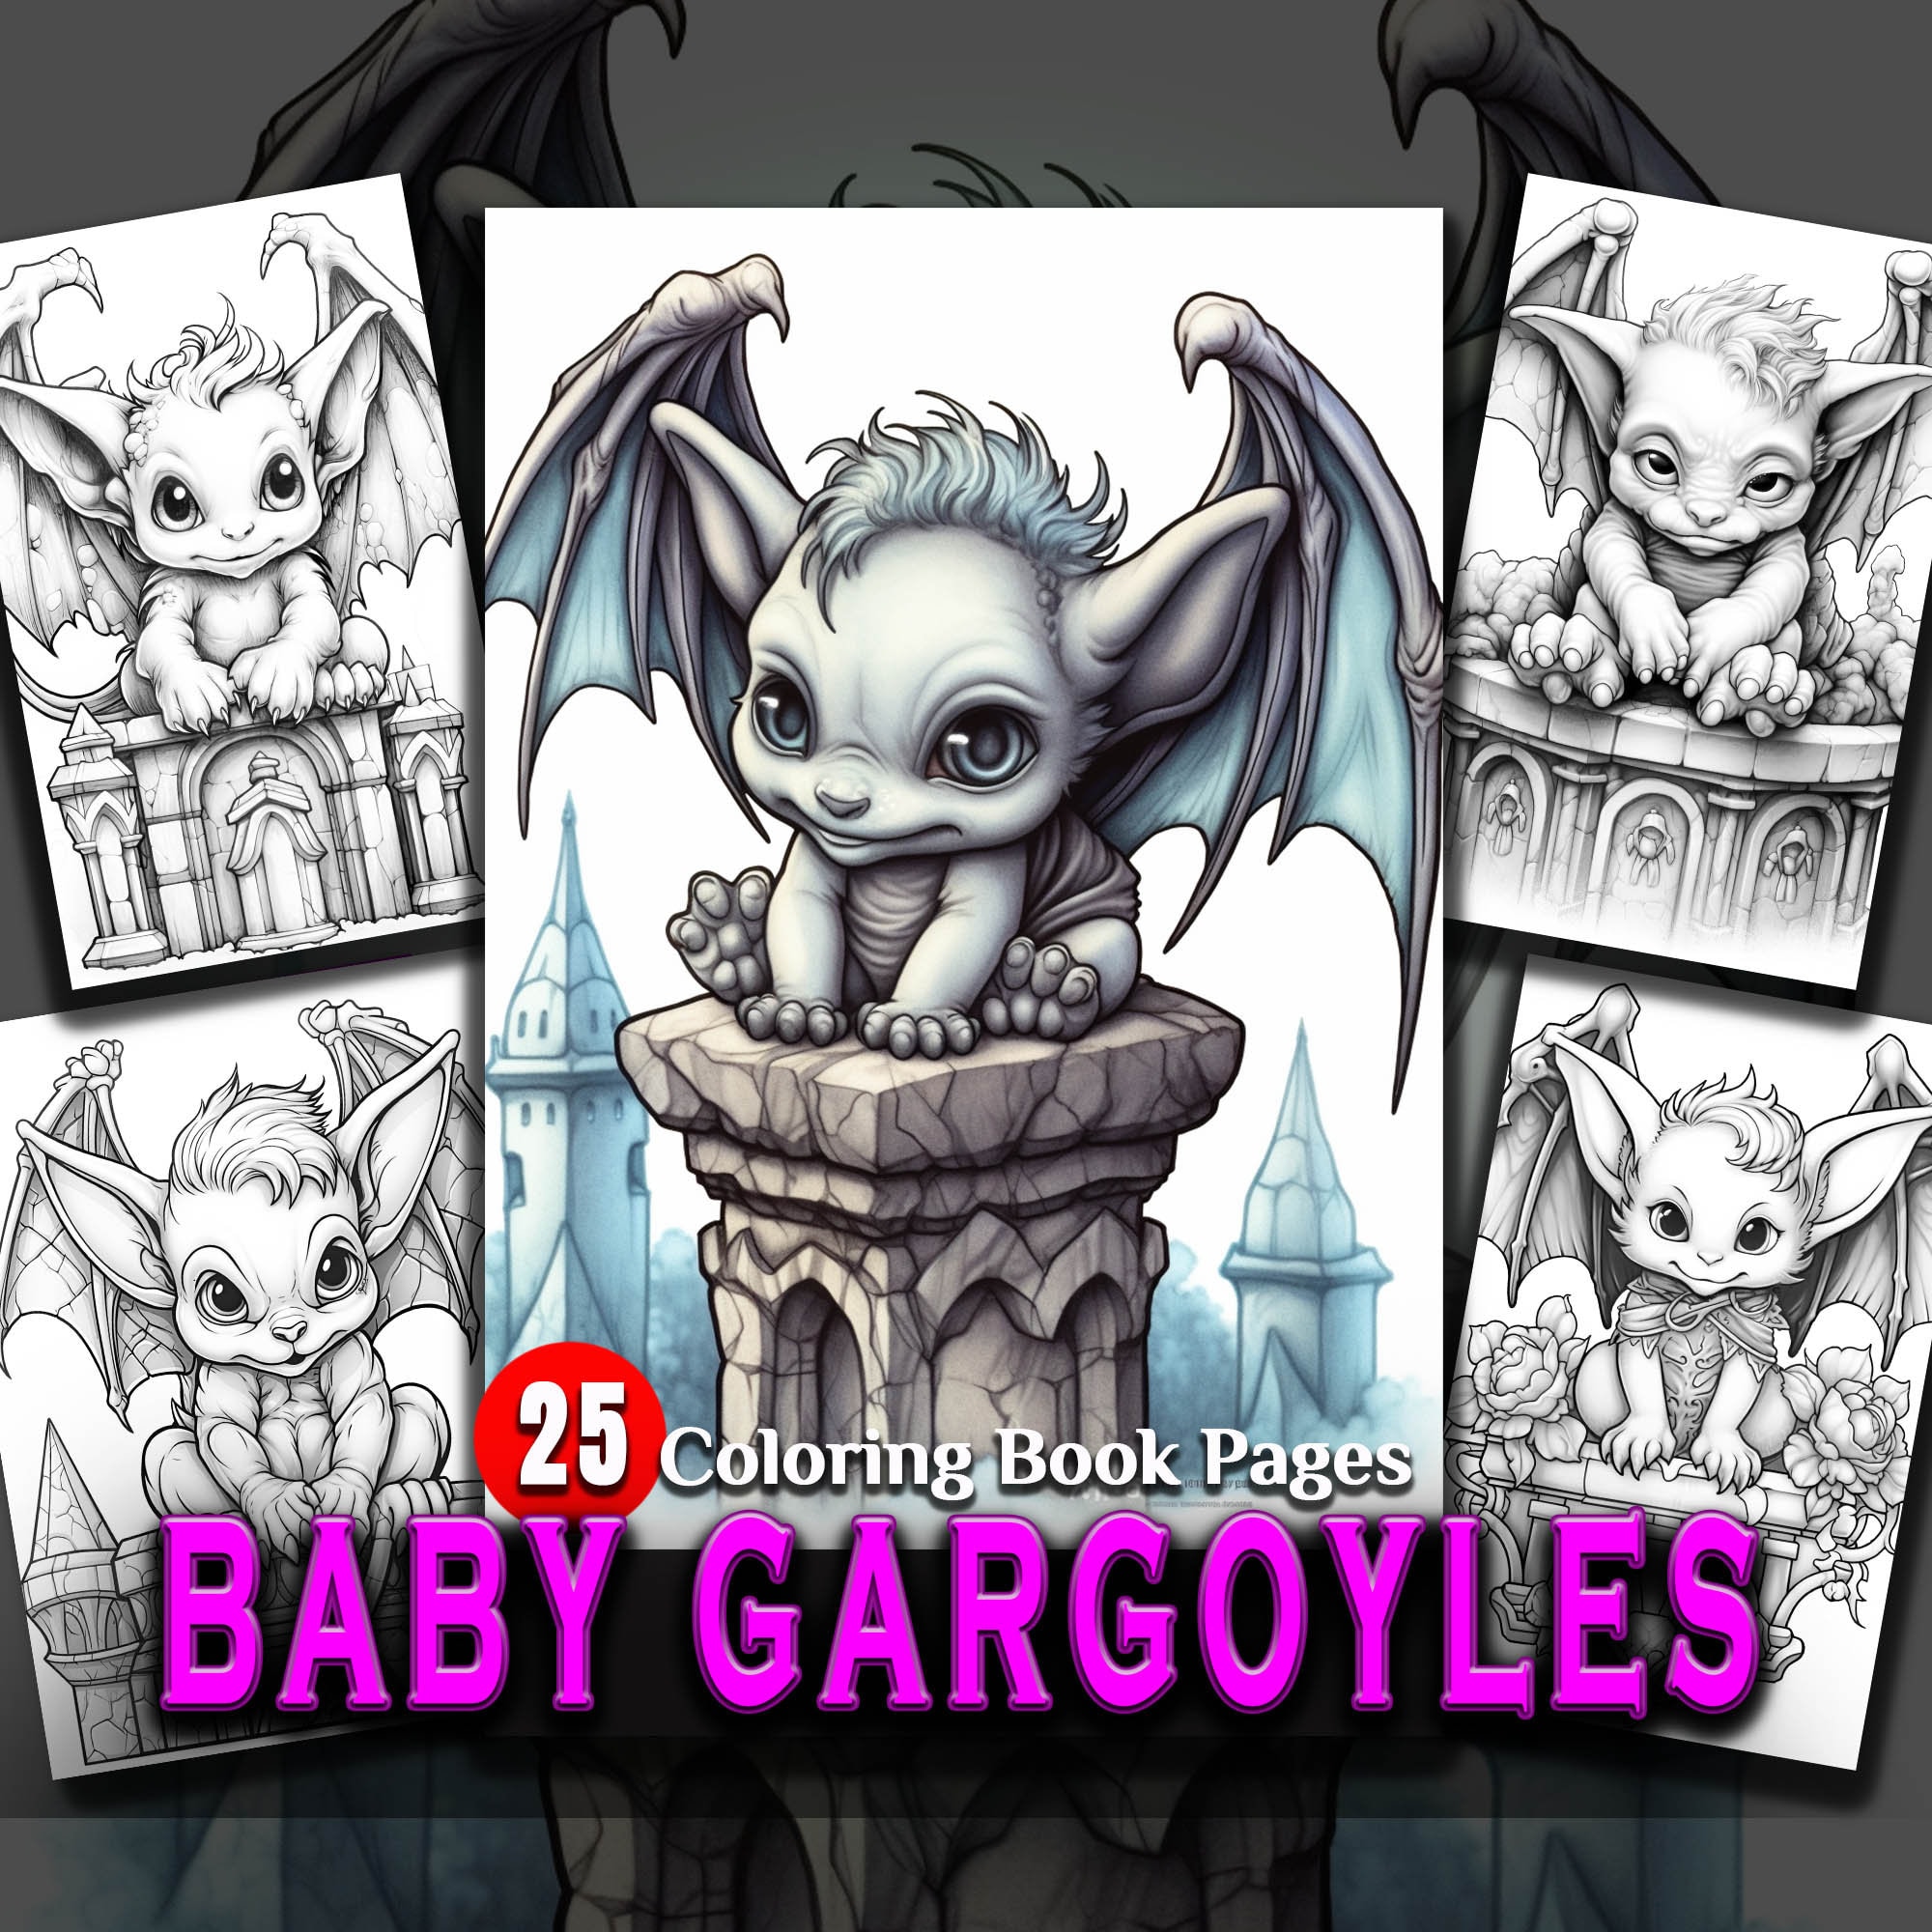 Baby gargoyles coloring pages printable adult coloring book pages instant download grayscale illustration adorable cute with cathedrals download now